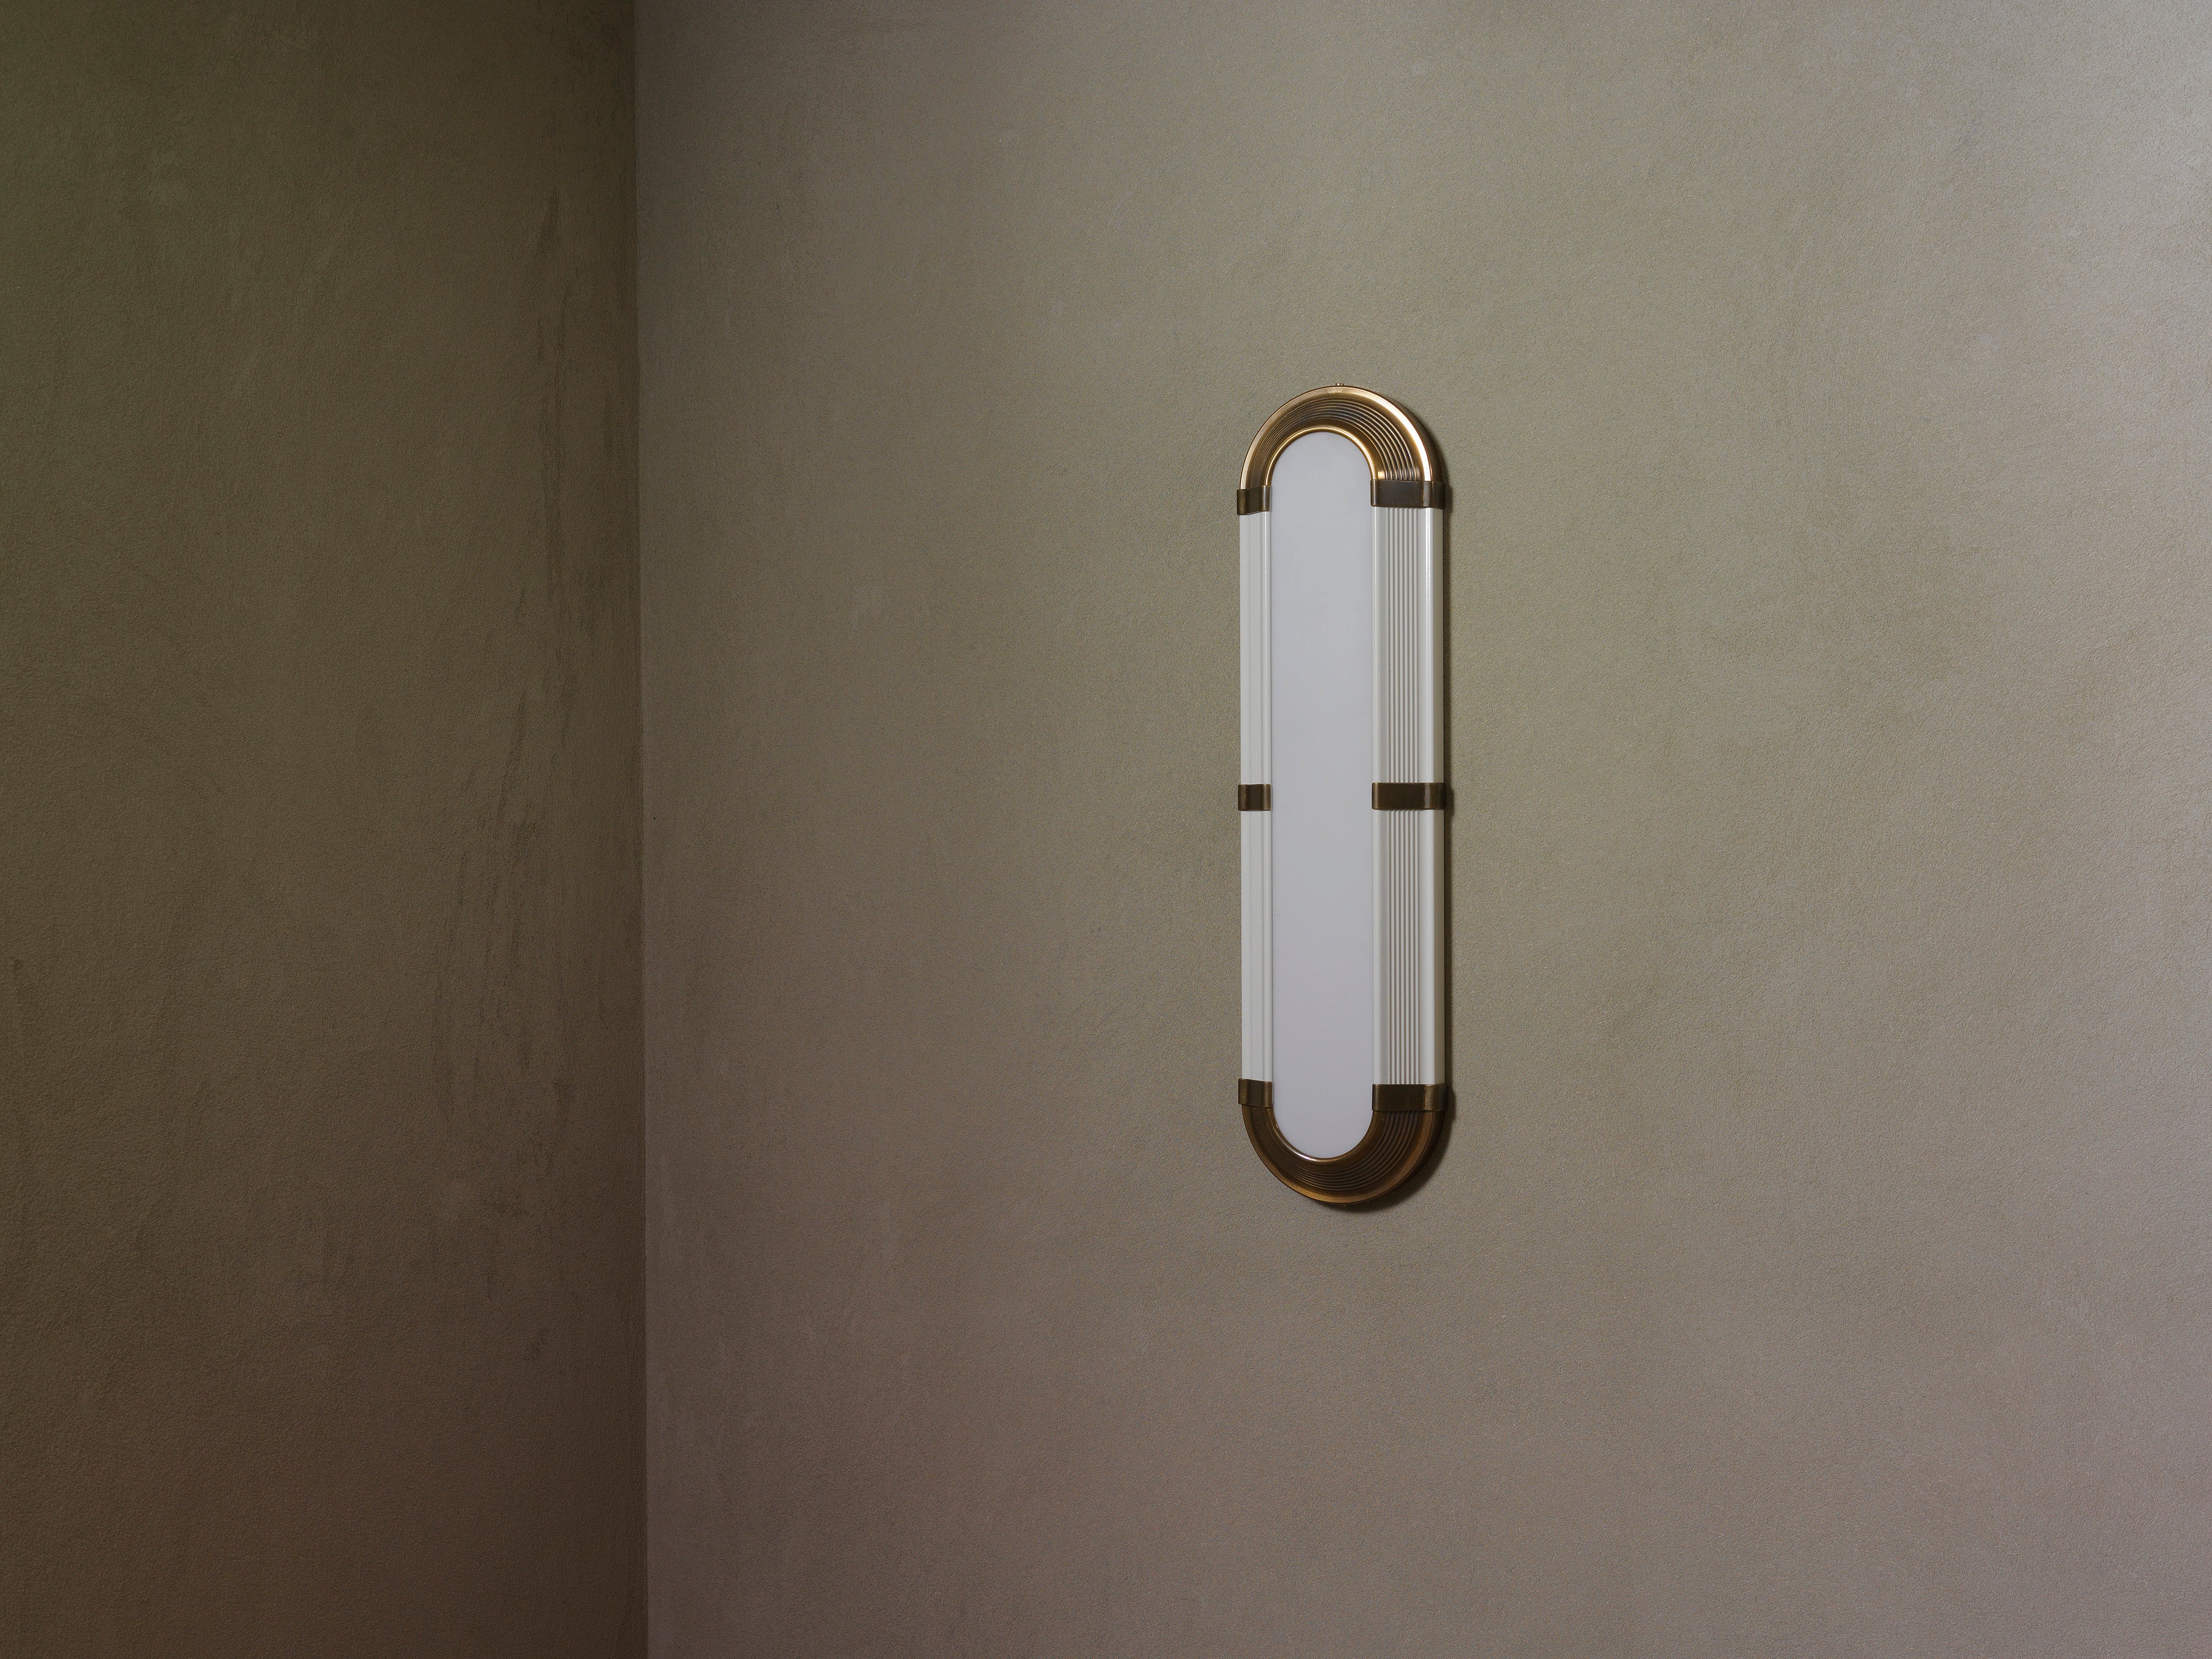 Handcrafted linear wall light by Transmitt. Mid-Century Inspired. Made in Australia.